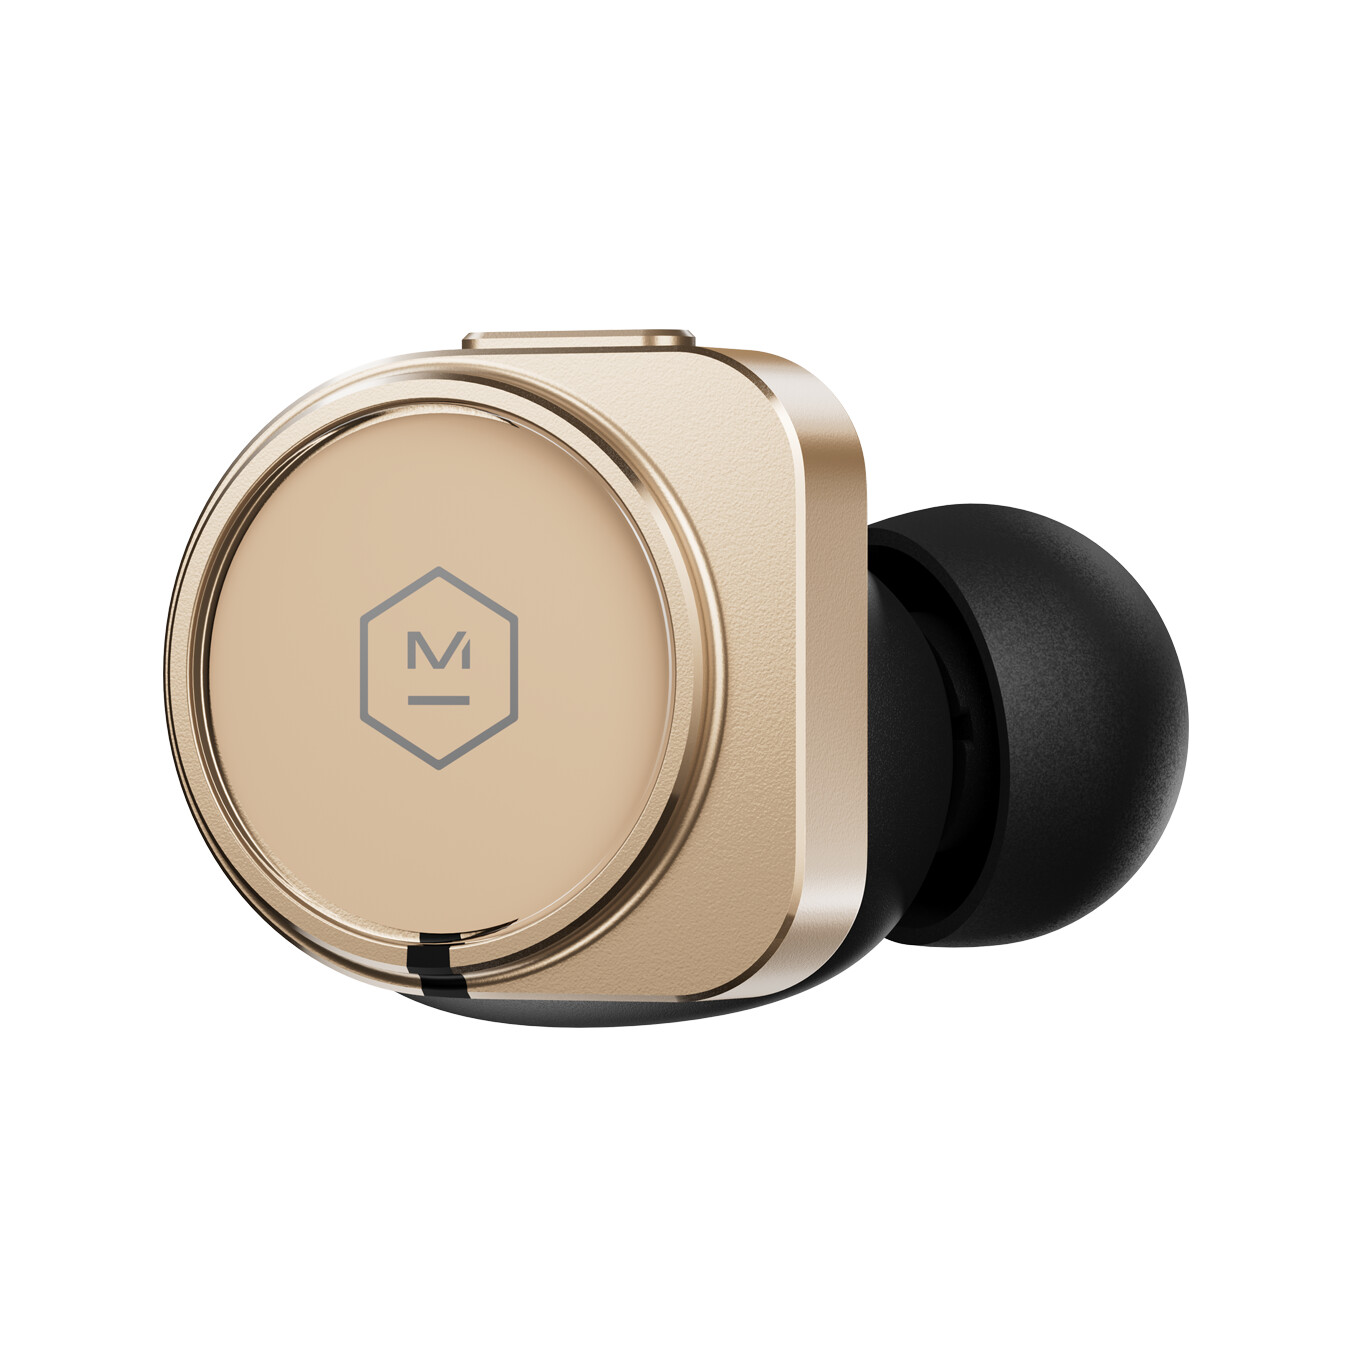 Maître & Dynamic presents the luxurious MW09 wireless earbuds with ANC